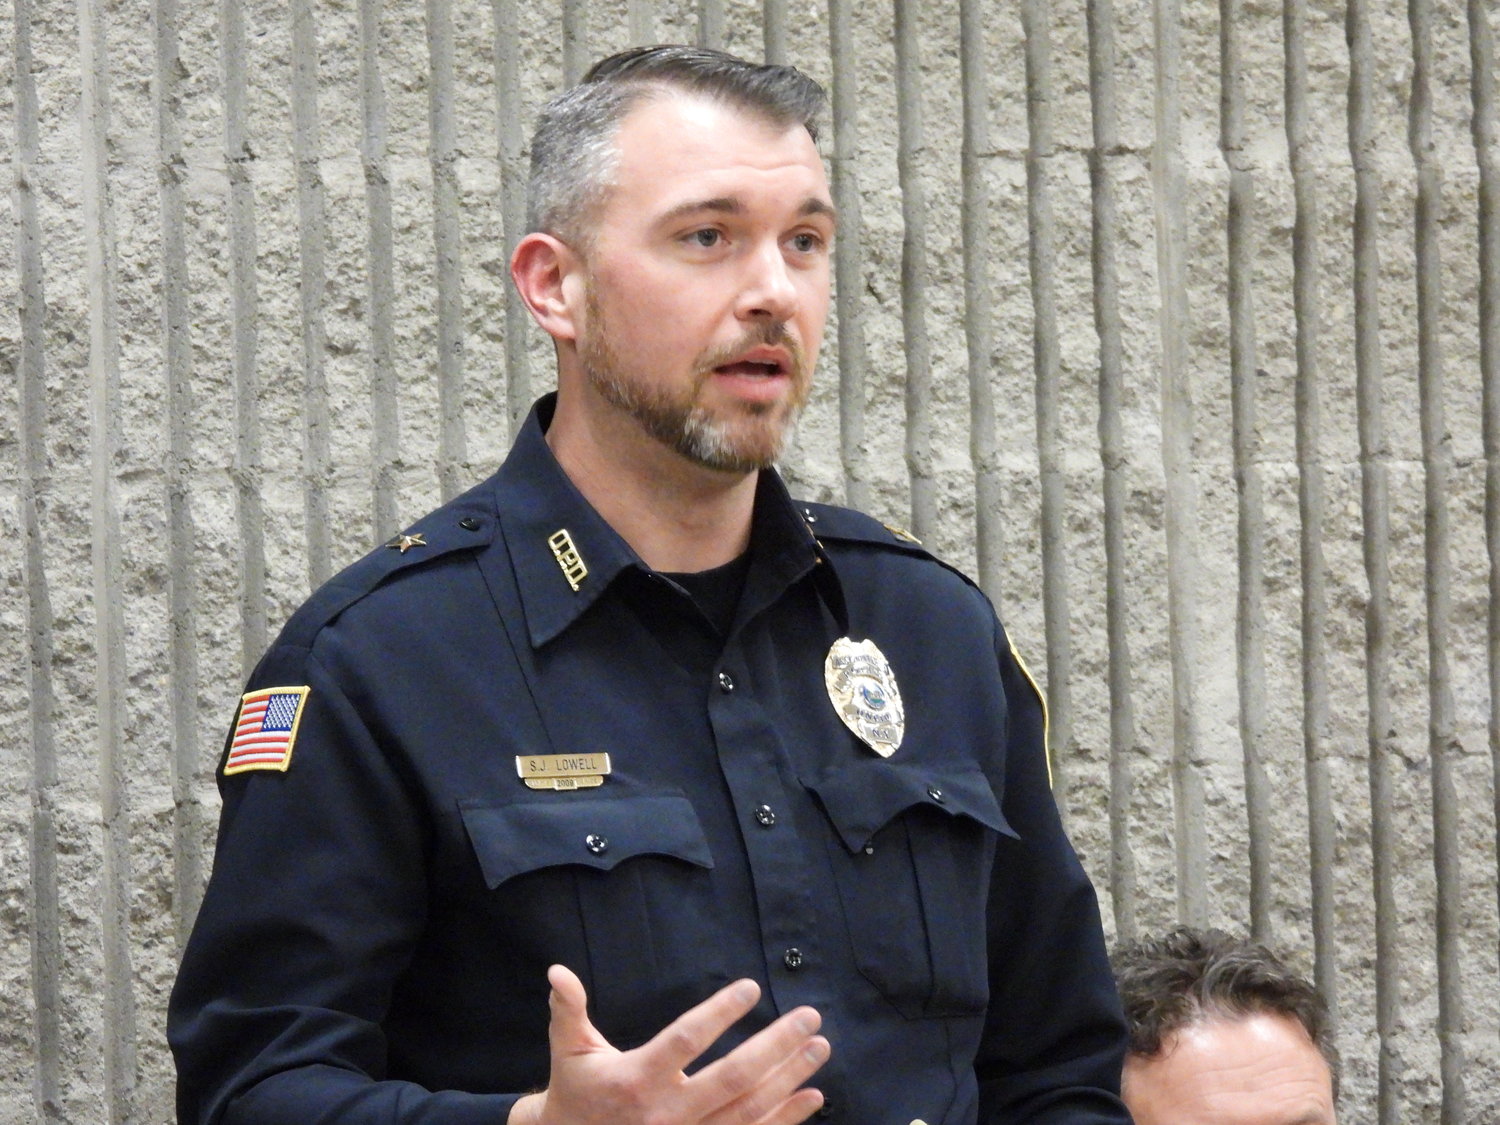 $150,000 GRANT — Assistant Police Chief Steven Lowell speaks on the benefits of the $150,000 that was recently awarded to the Oneida City Police Department and how it will be used to fight against violent crime in Oneida.